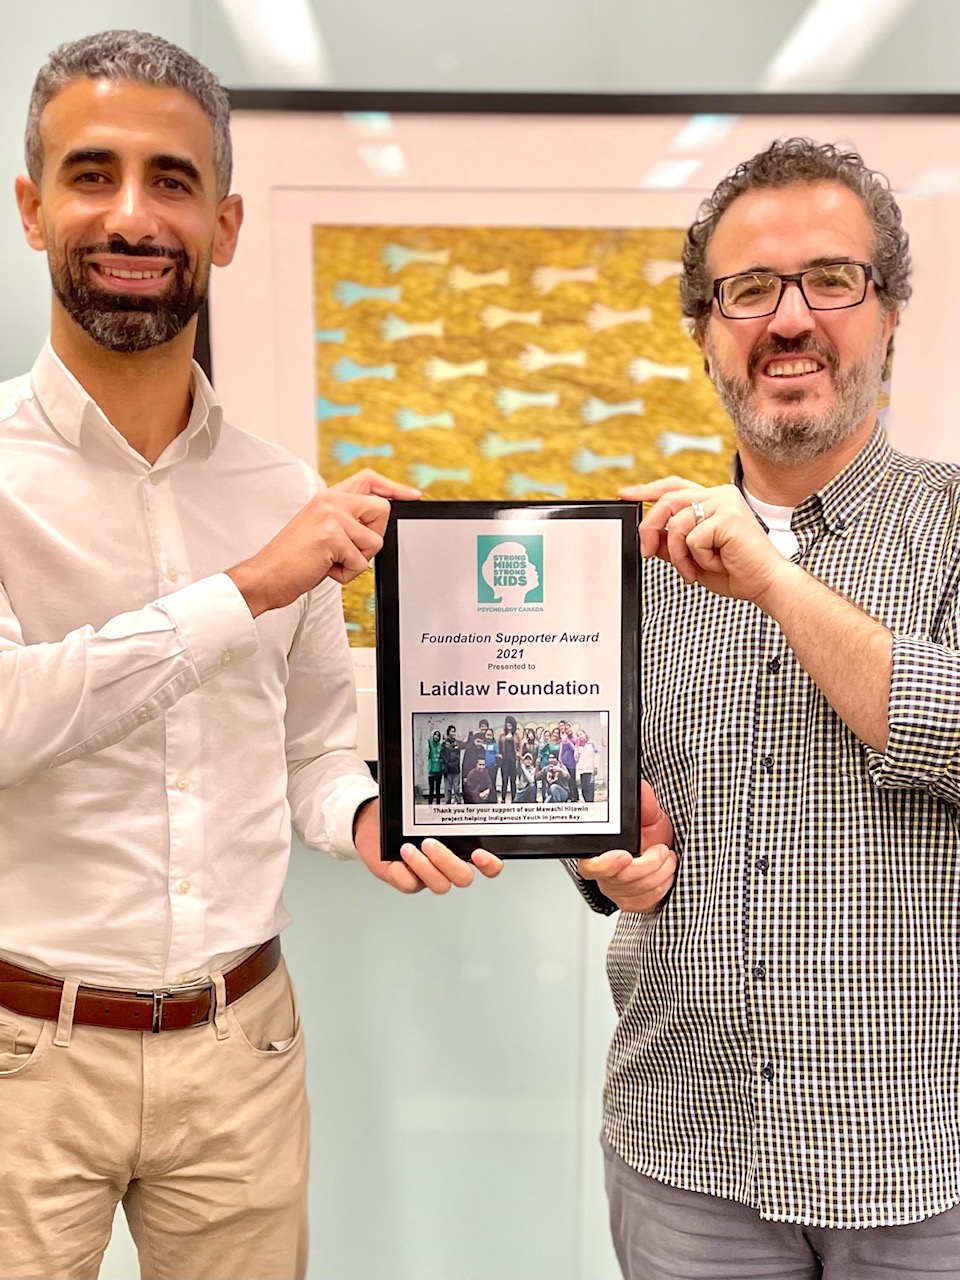 Tamer (left) and Laidlaw Executive Director Jehad Aliweiwi (right) accept an award from the Psychology Foundation of Canada and Strong Minds Strong Kids.